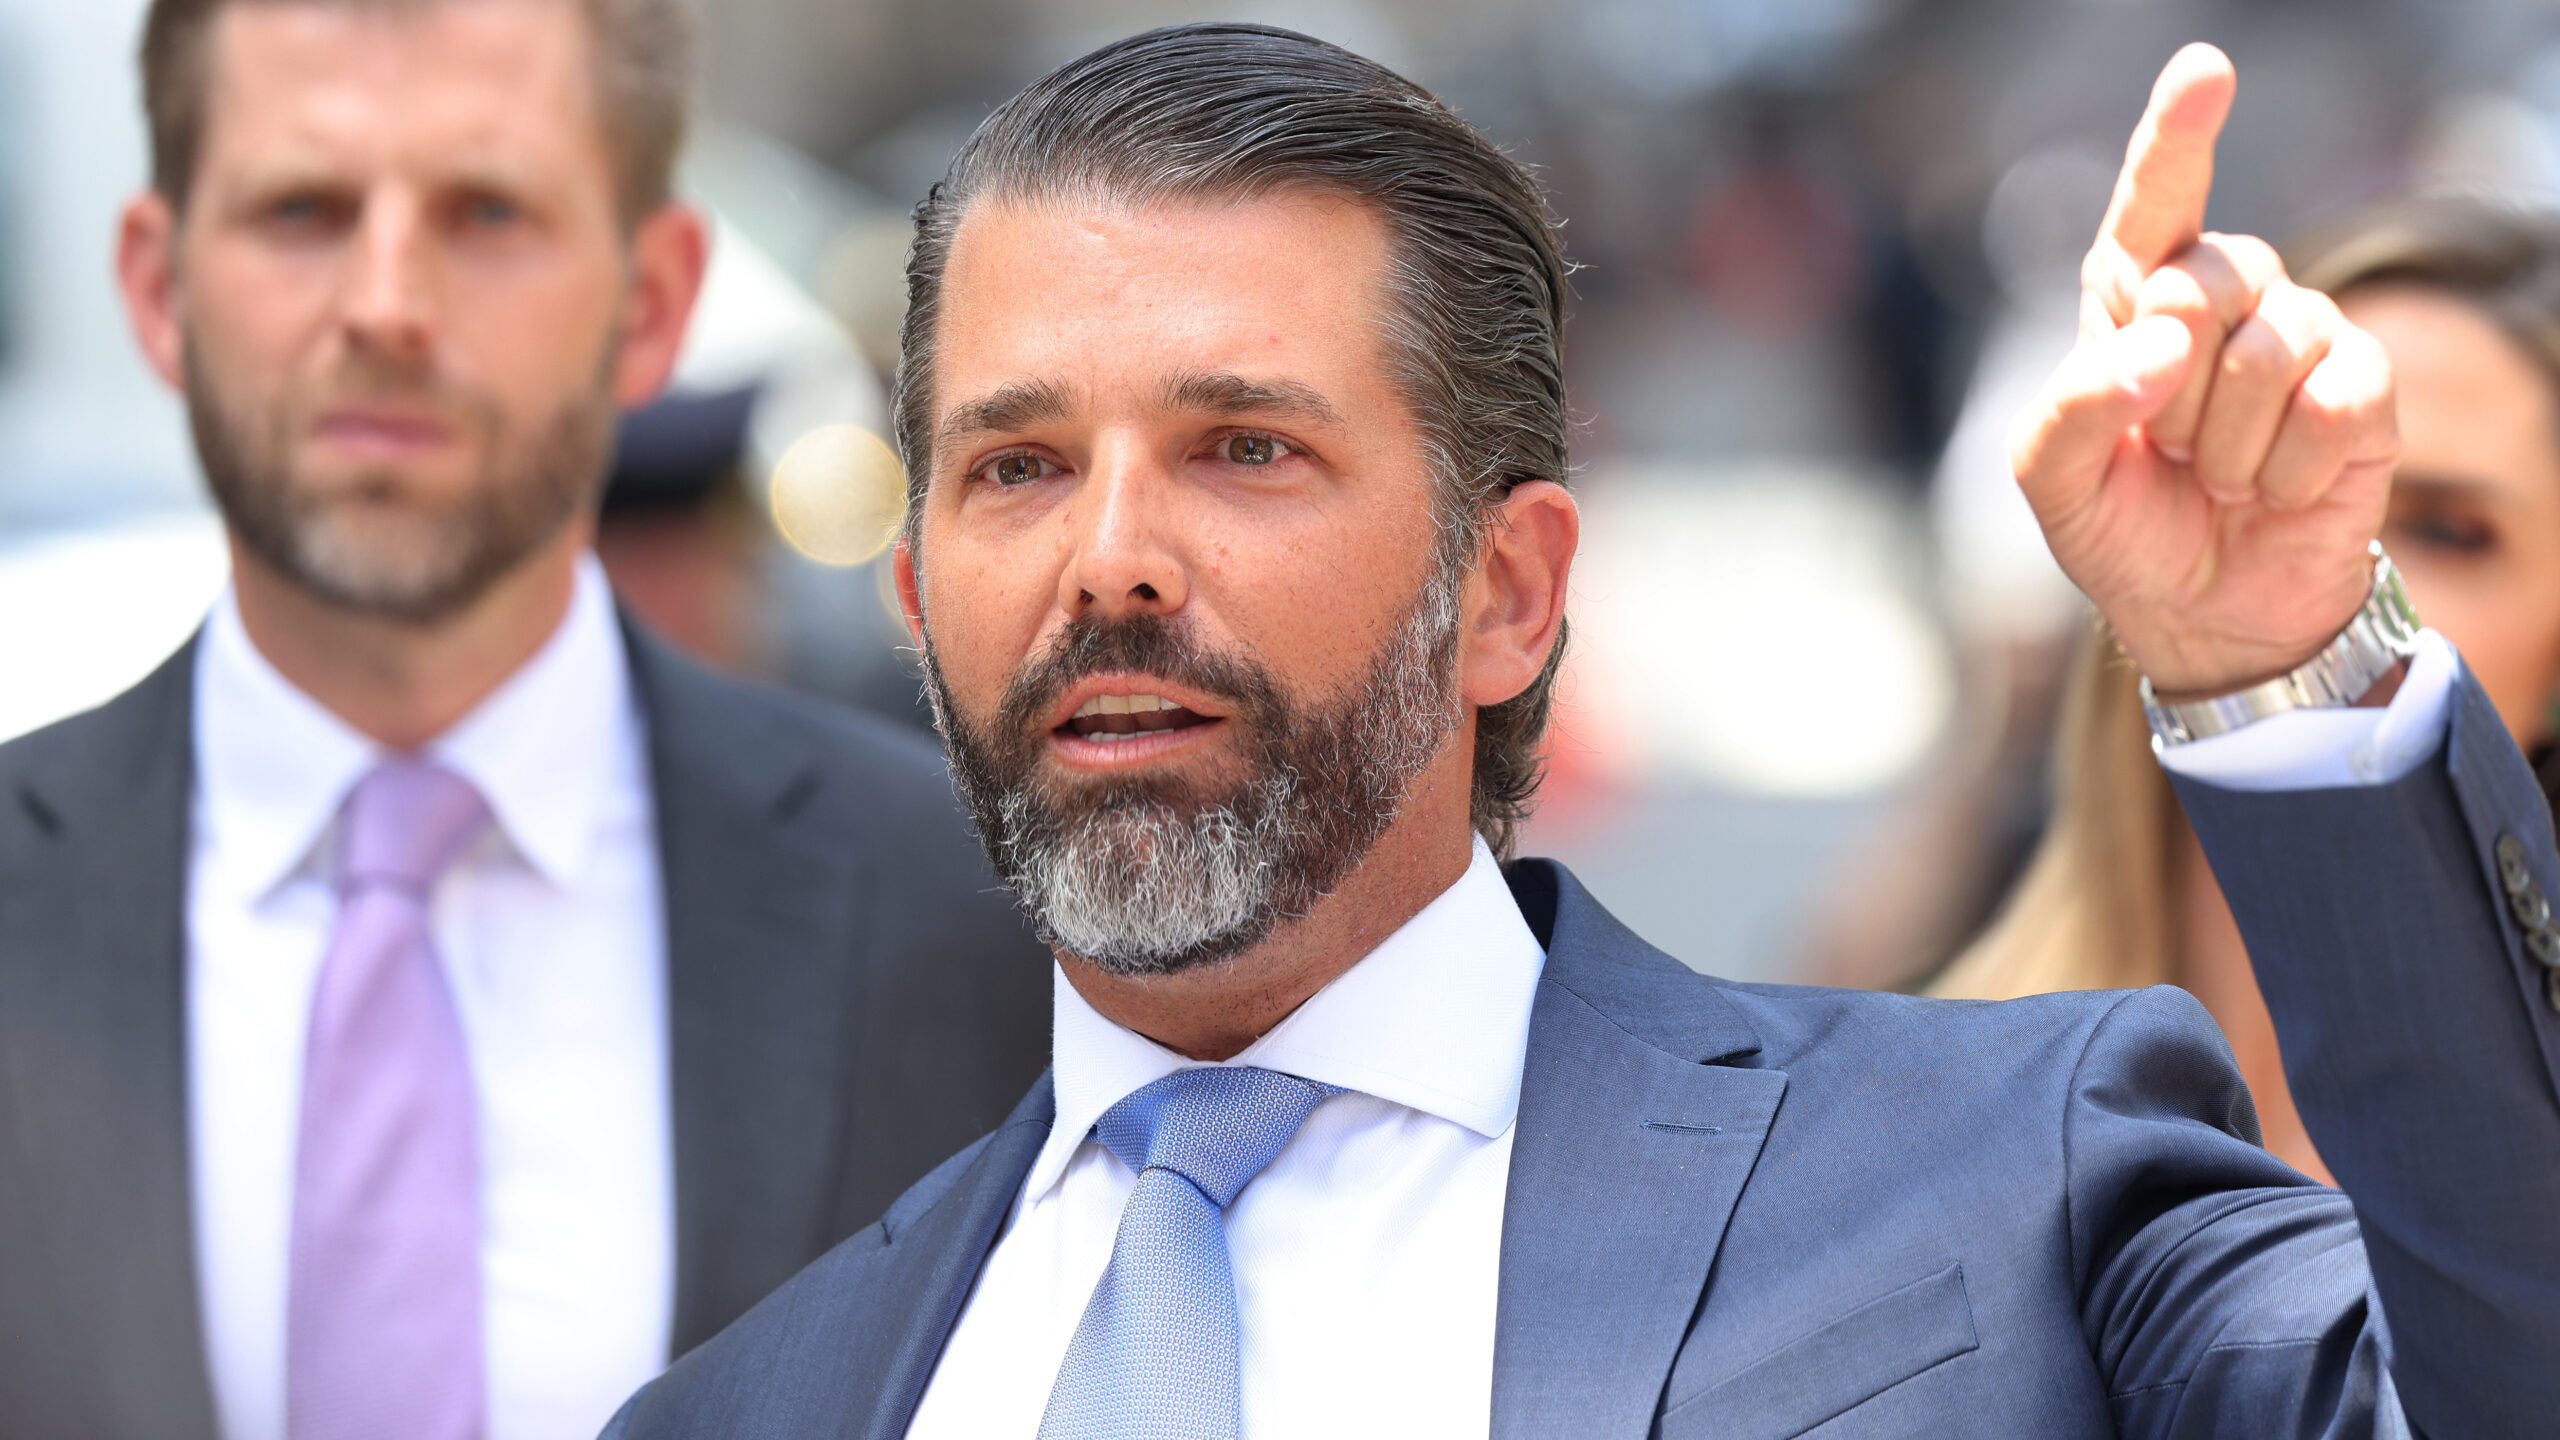 Donald Trump Jr. criticizes ‘Witch Hunt’ trial against father, calling out Biden campaign rally nearby